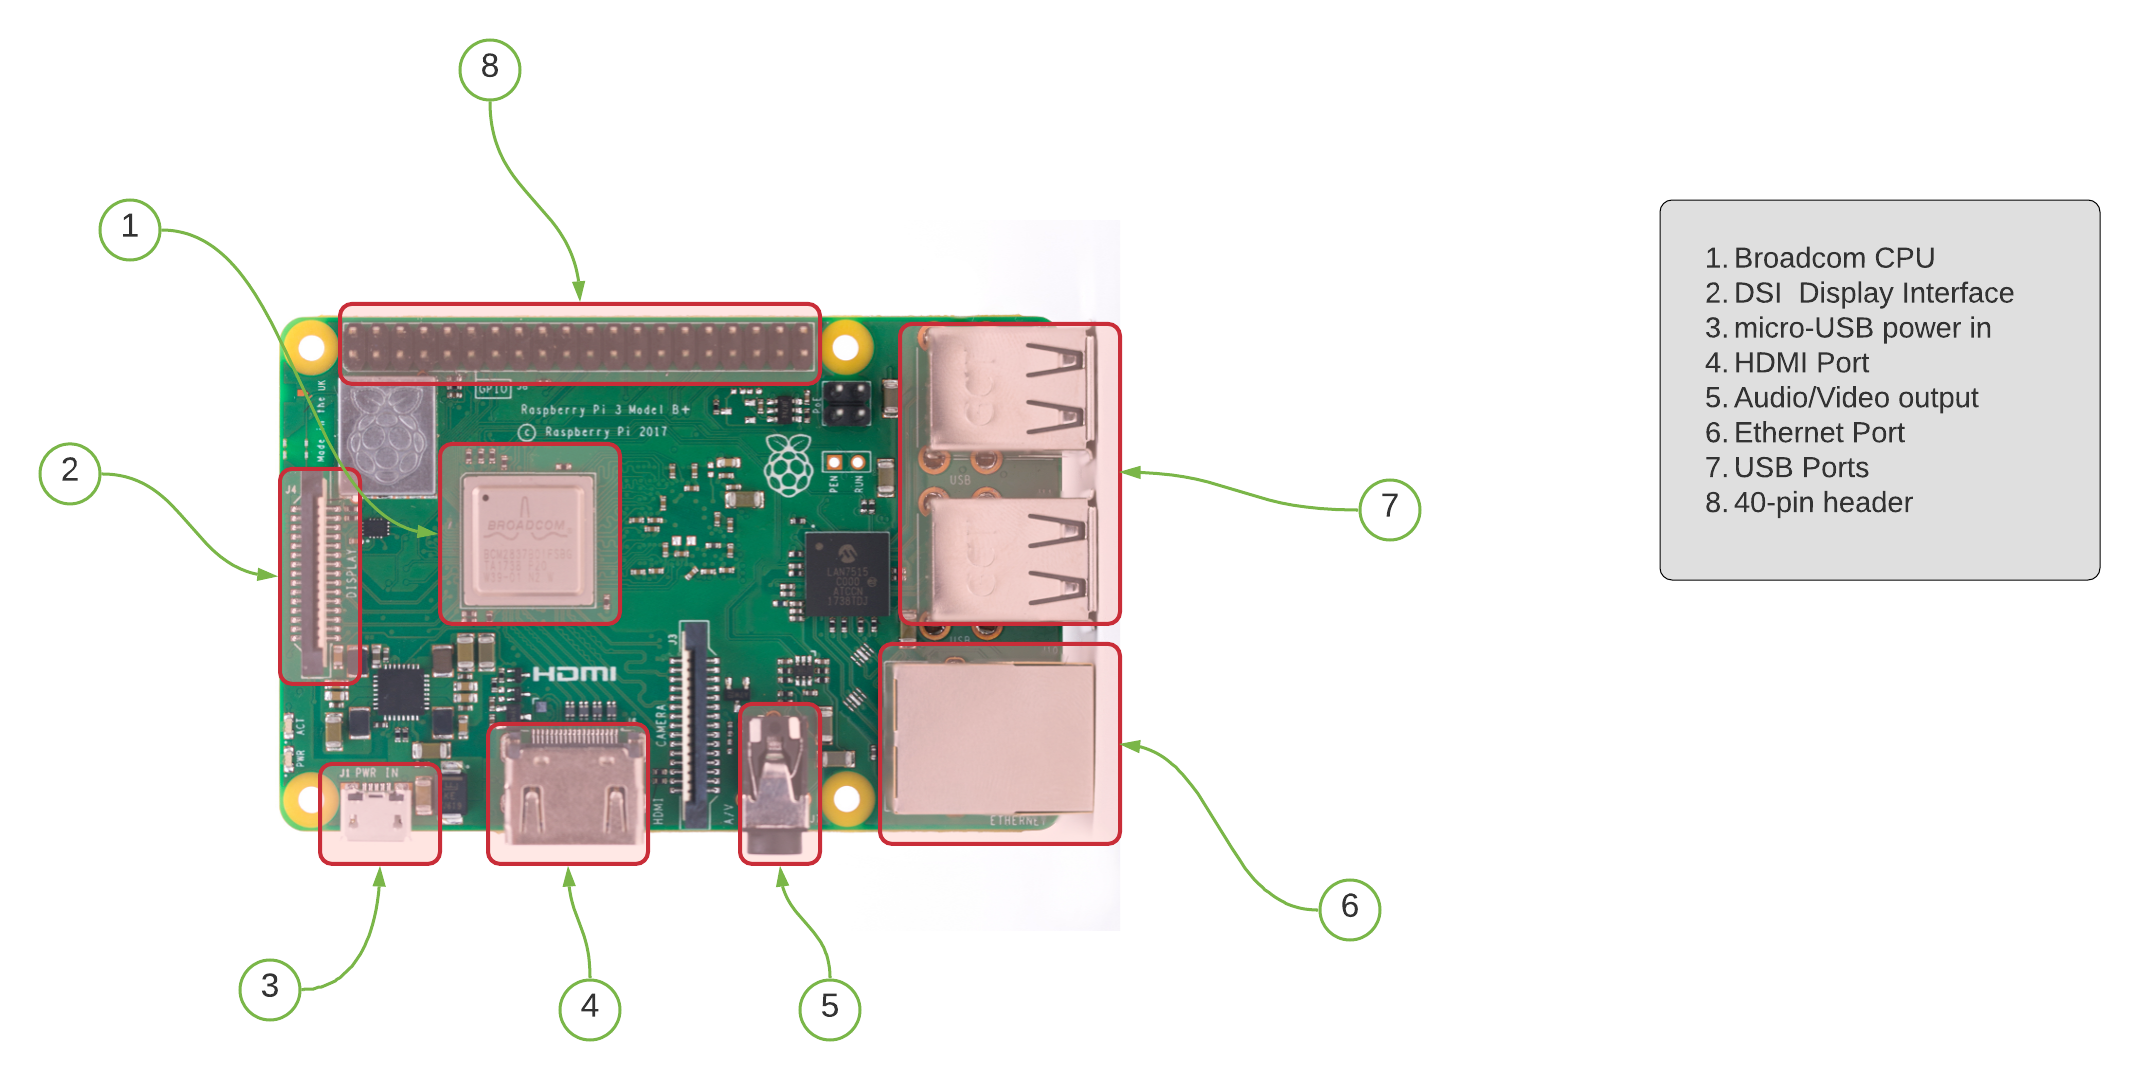 Answering some questions about the Raspberry Pi 5